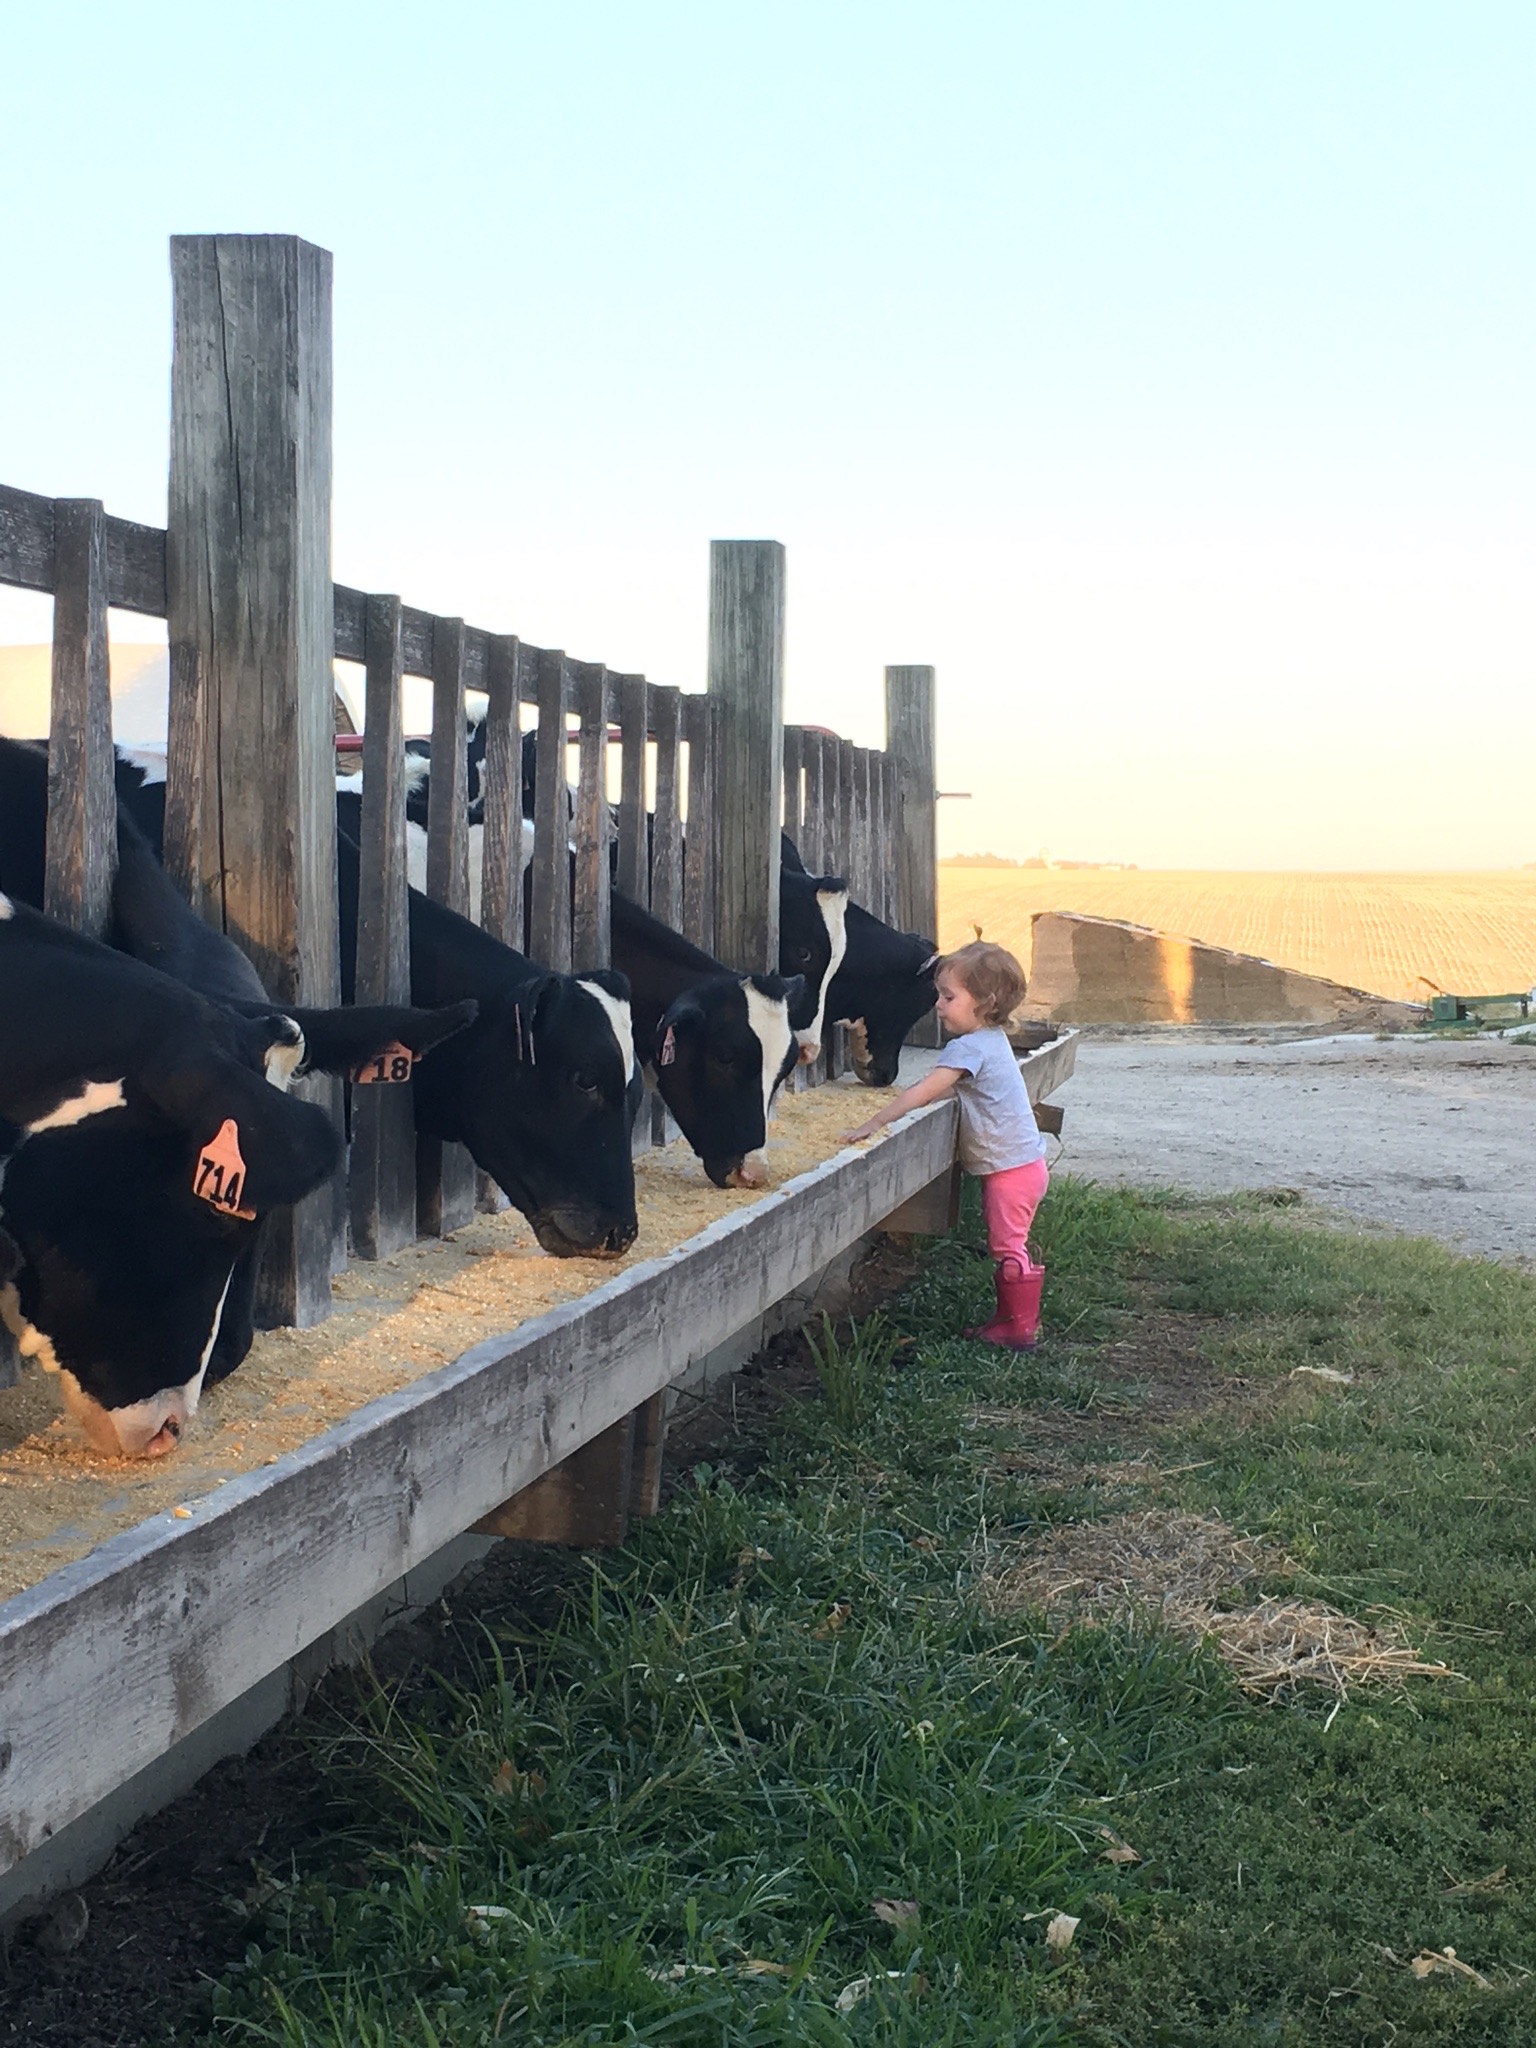 A little girl stands in front of some dairy cows eating from a trough.